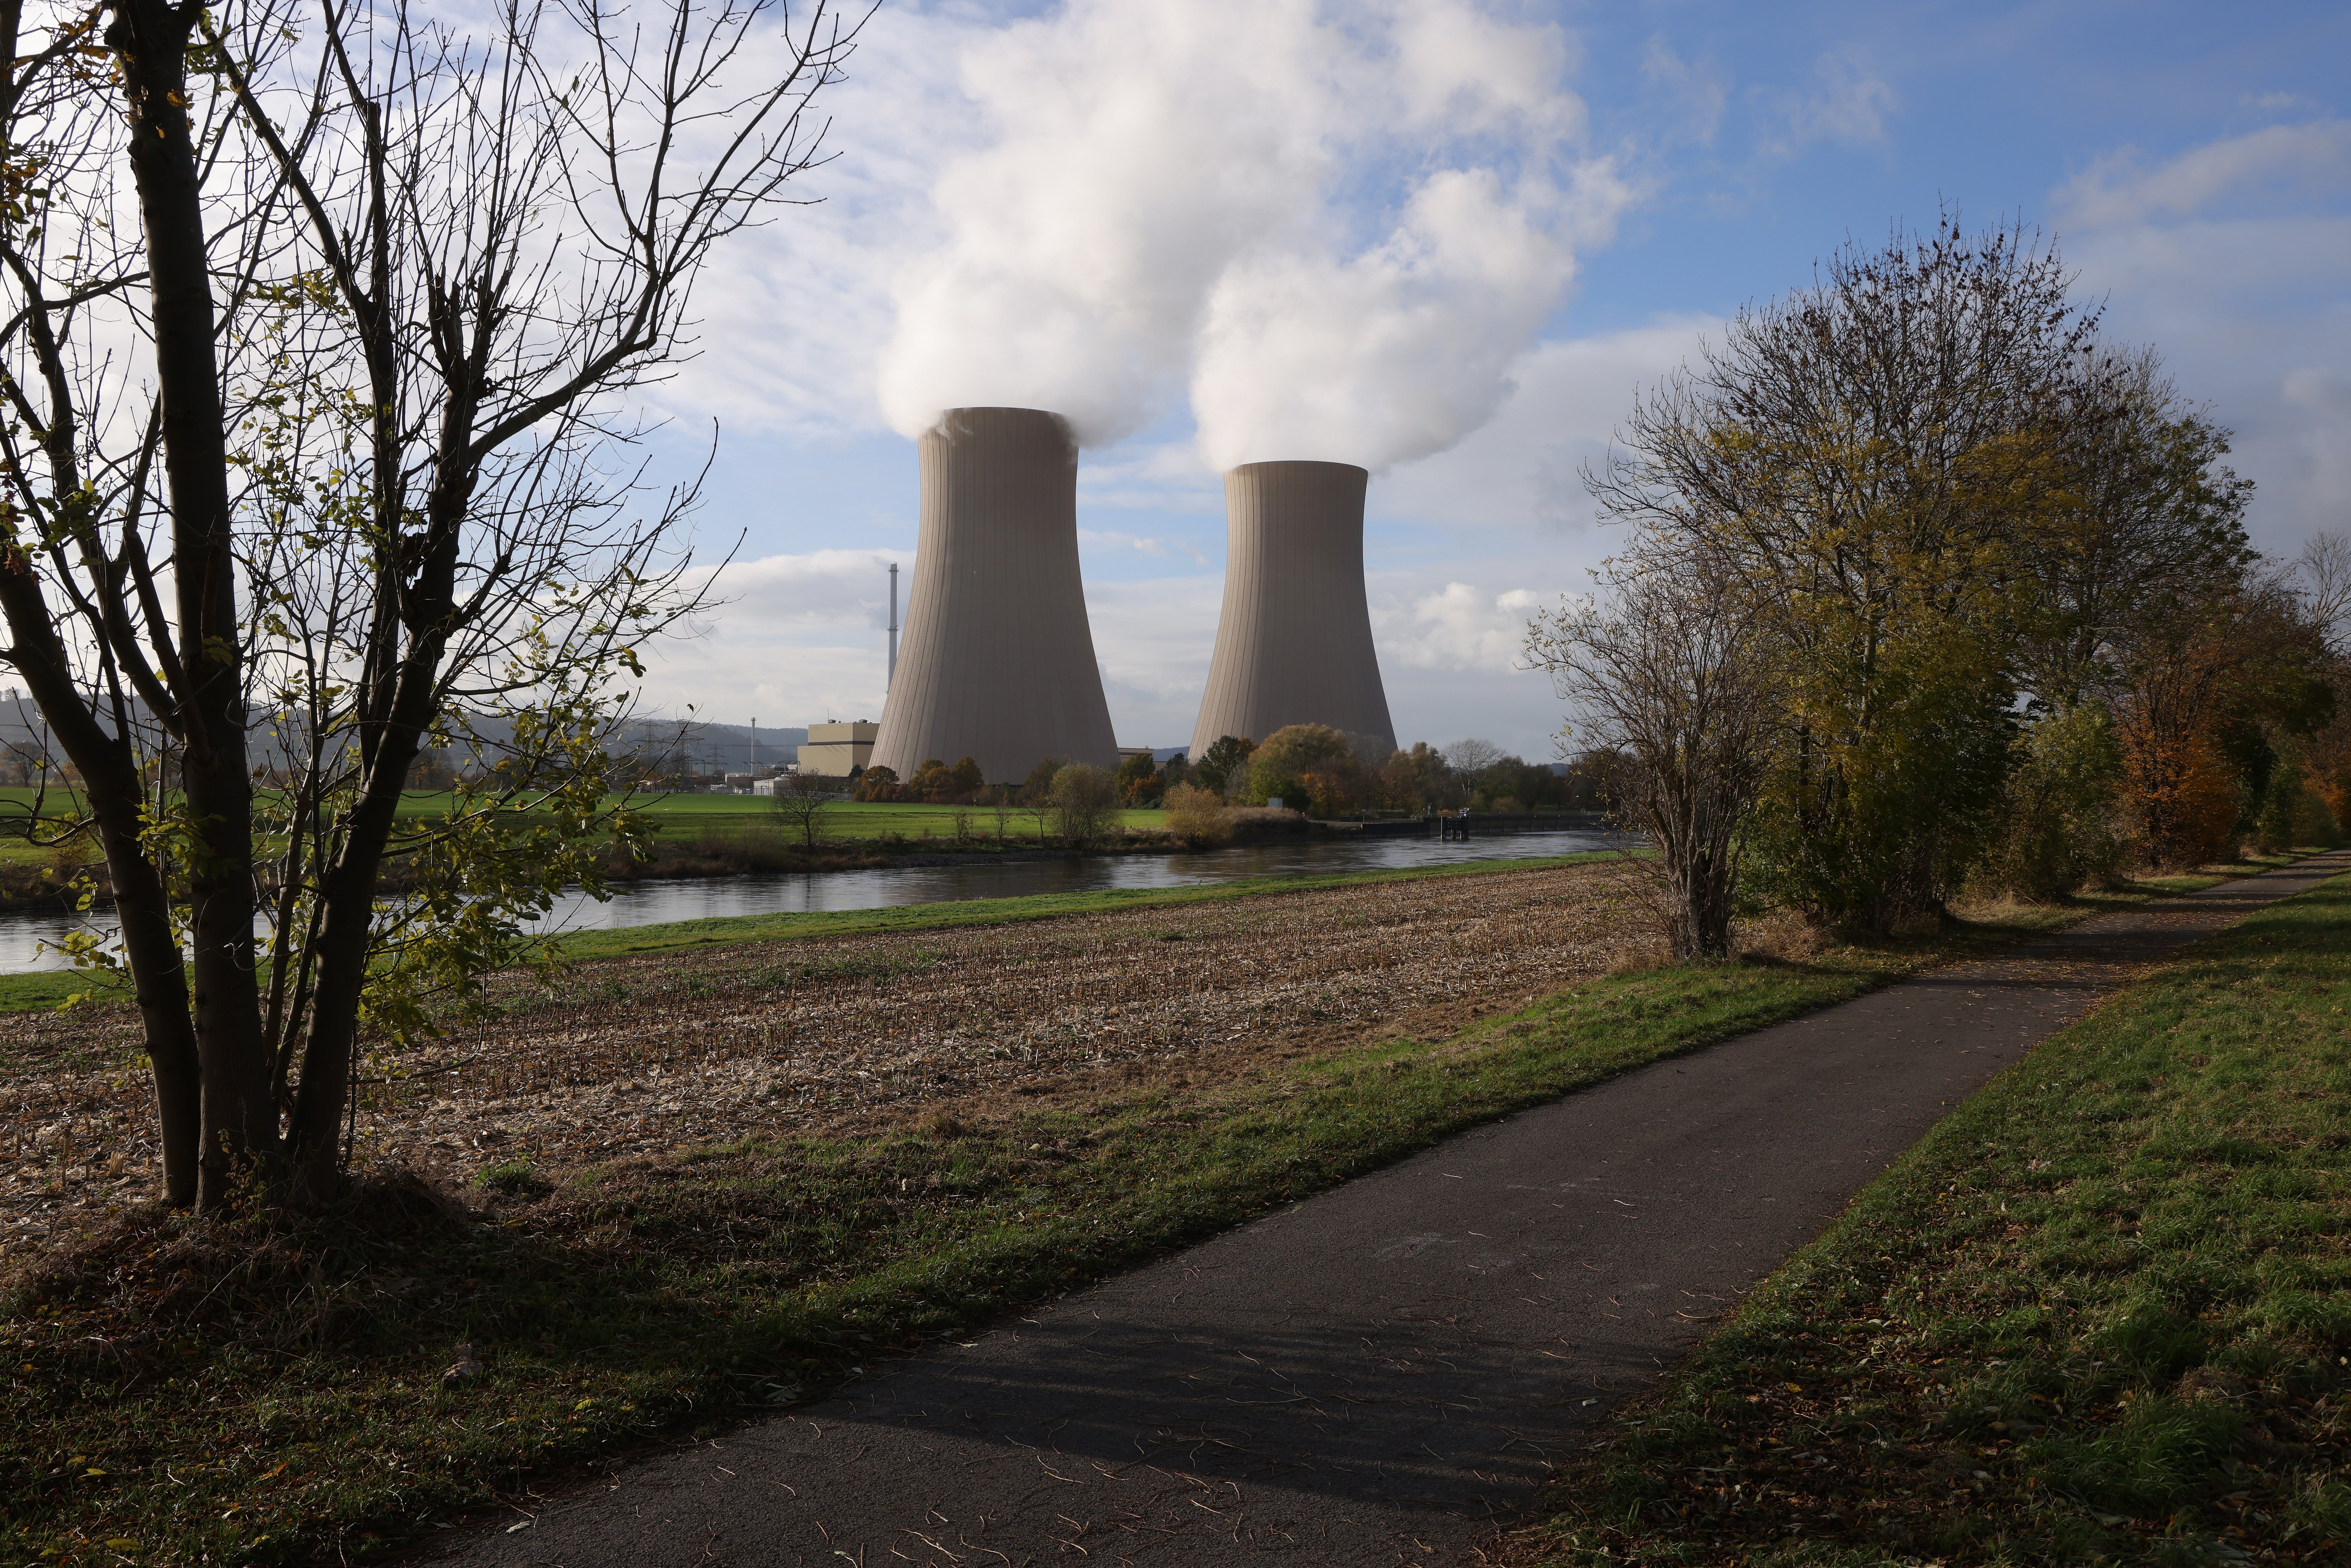 Steam rises from cooling towers of the Grohnde Nuclear Power Plant